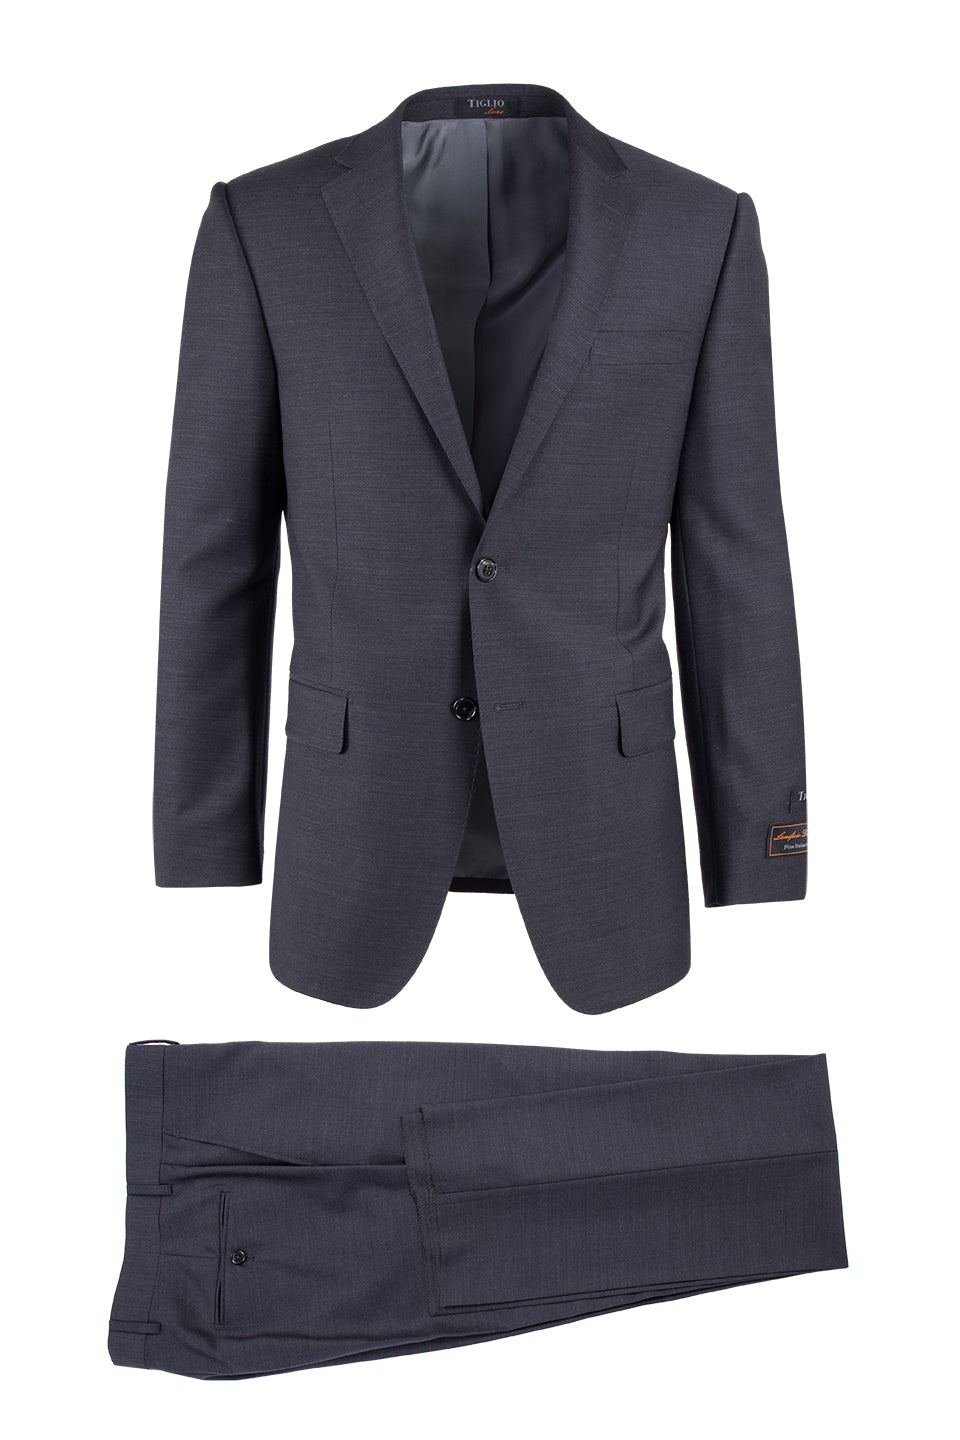 Novello Charcoal Gray, Modern Fit, Tiglio Suit Luxe by Pure TIG10 Tiglio | Wool